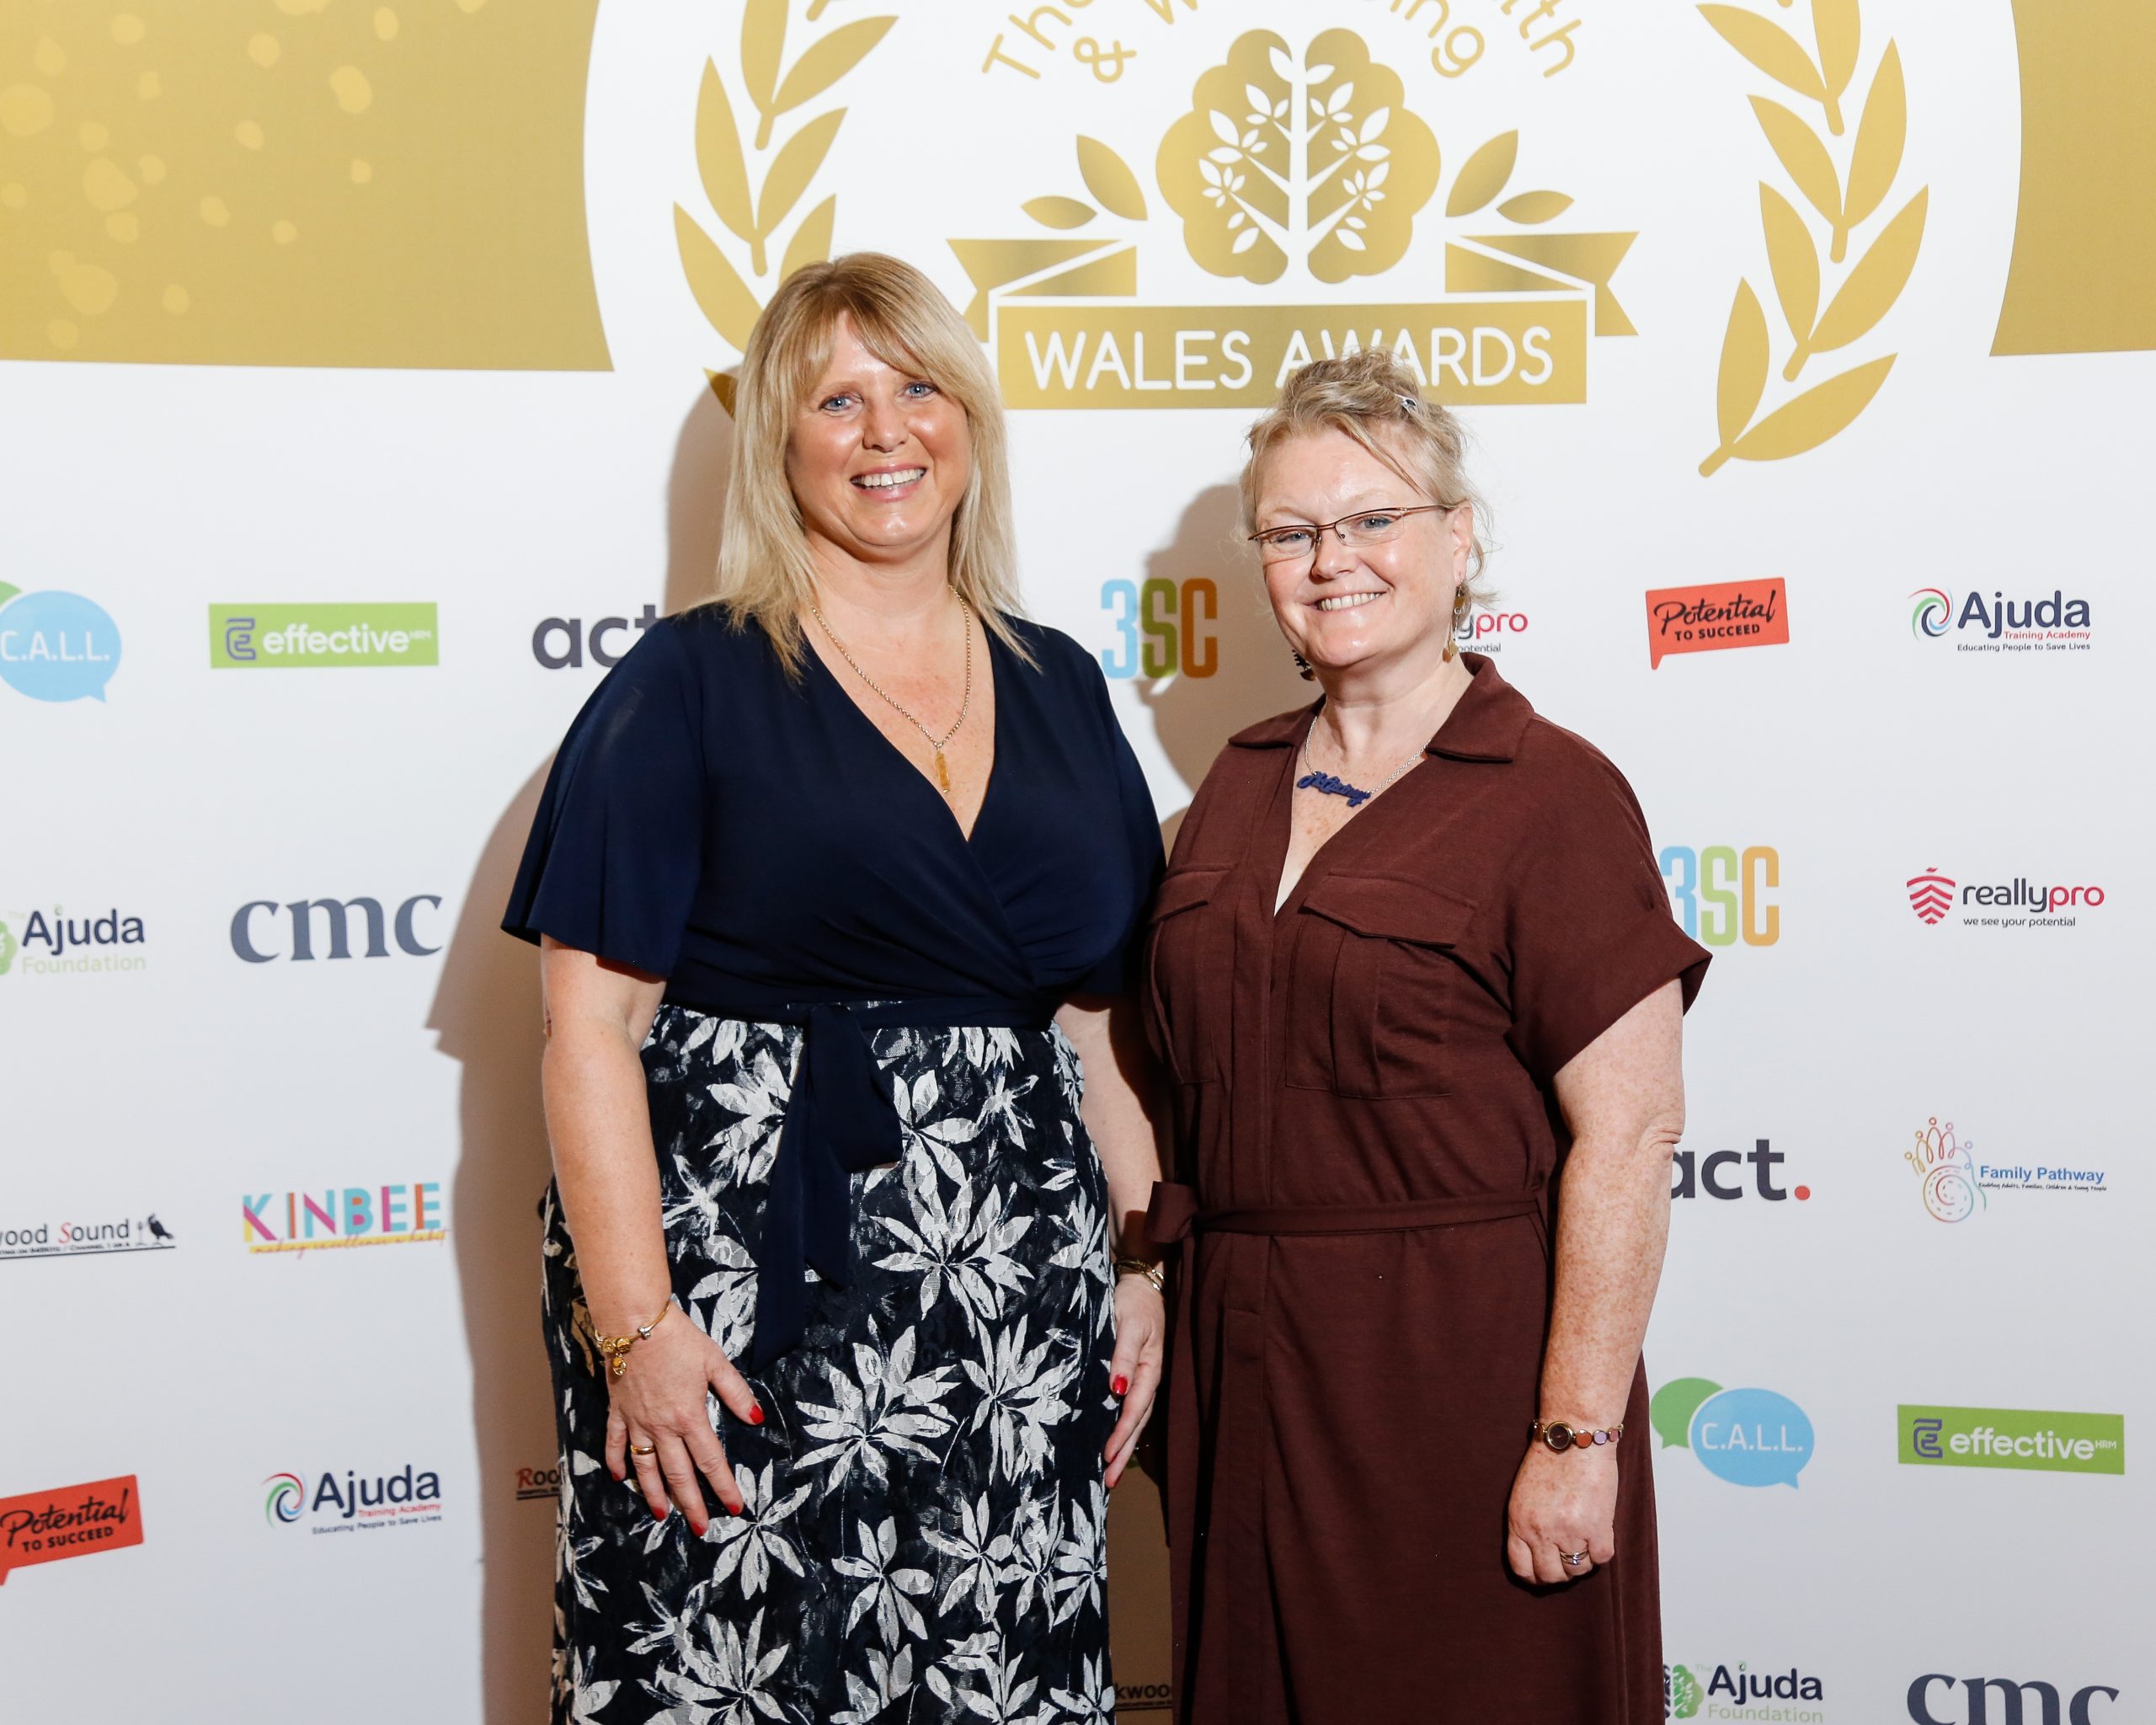 Two women standing in front of a presentation board at an awards ceremony. They look very smart, and are smiling directly at the camera lens. One woman is blonde, and wearing a black and white dress. This is Dawn Evans, CEO of the Ajuda Foundation. The other is a greying redhead. She's wearing a brown dress with a tie belt. This is Bobbie Allen, and she's the project co-ordinator for the Ajuda Foundation.